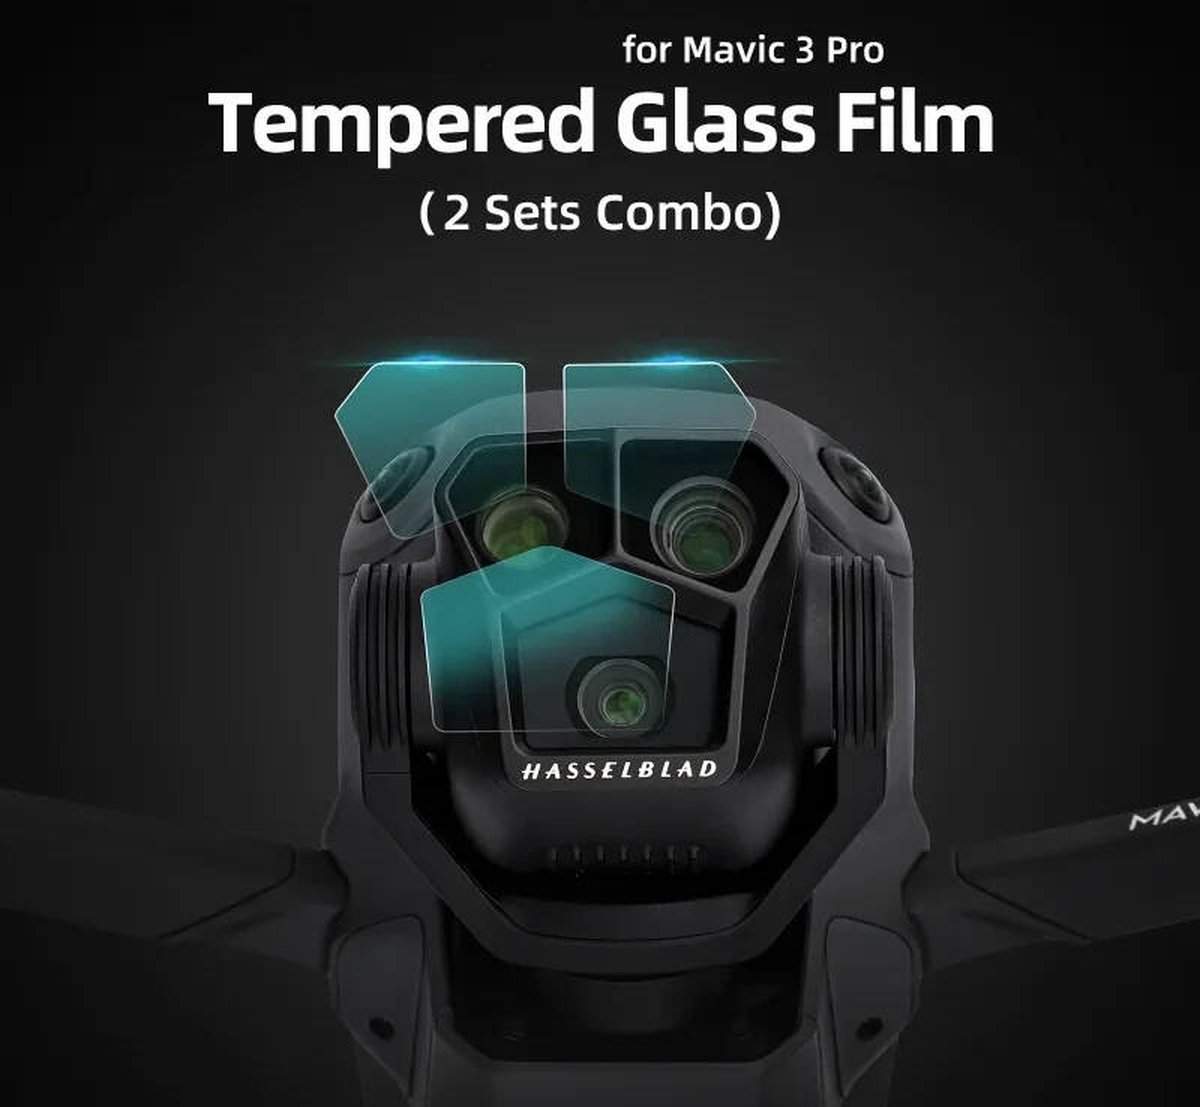 50CAL Tempered Glass Film Combo for Mavic 3 pro (2 Sets Comb